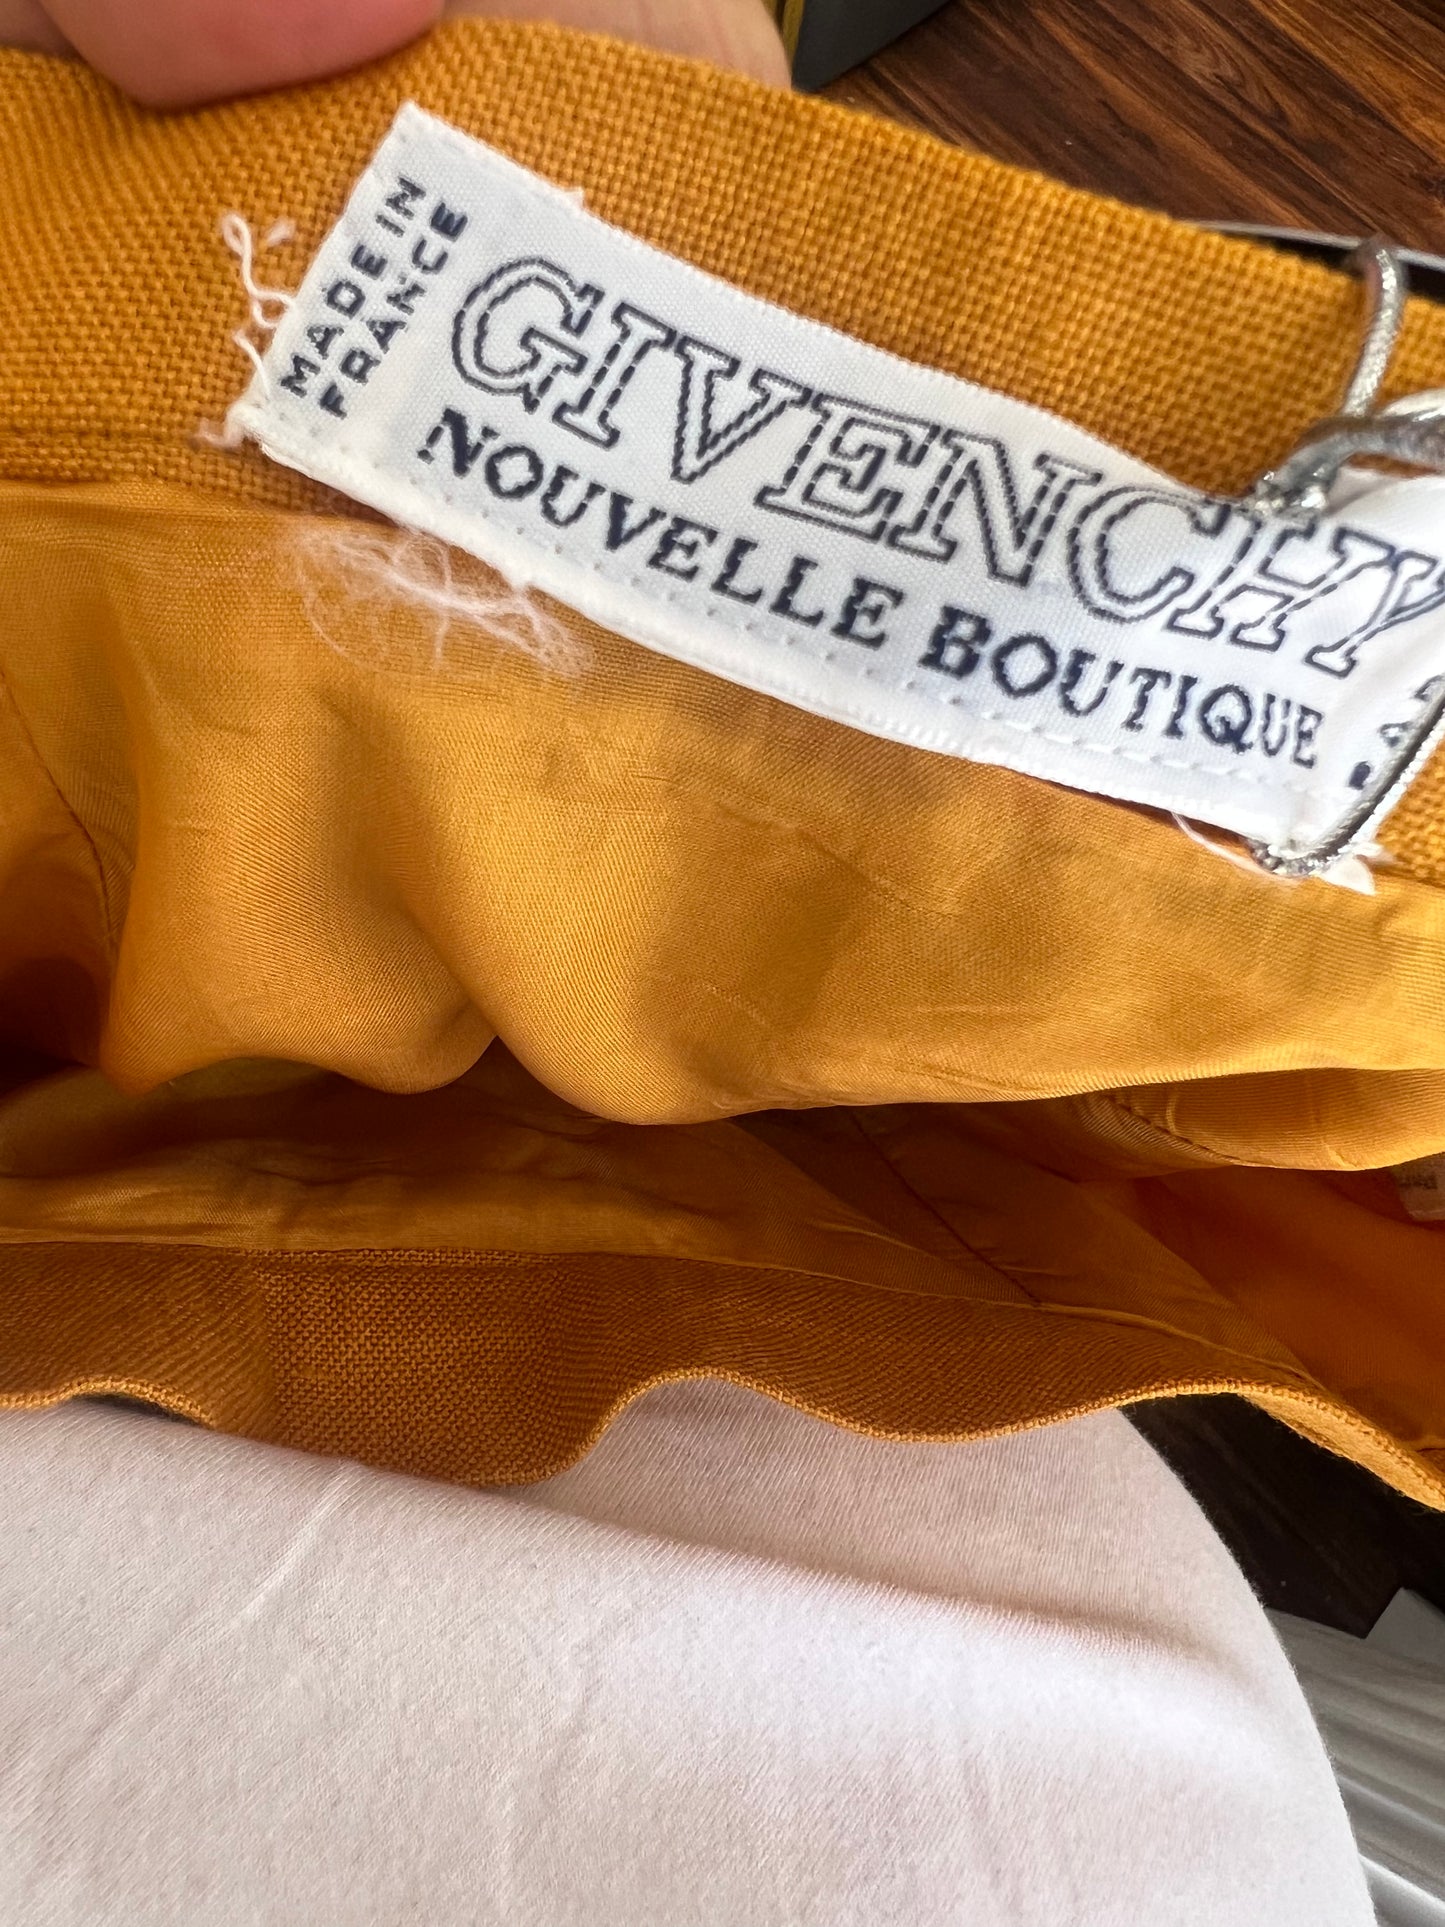 GIVENCHY Vintage Mustard Yellow Skirt, Size XS